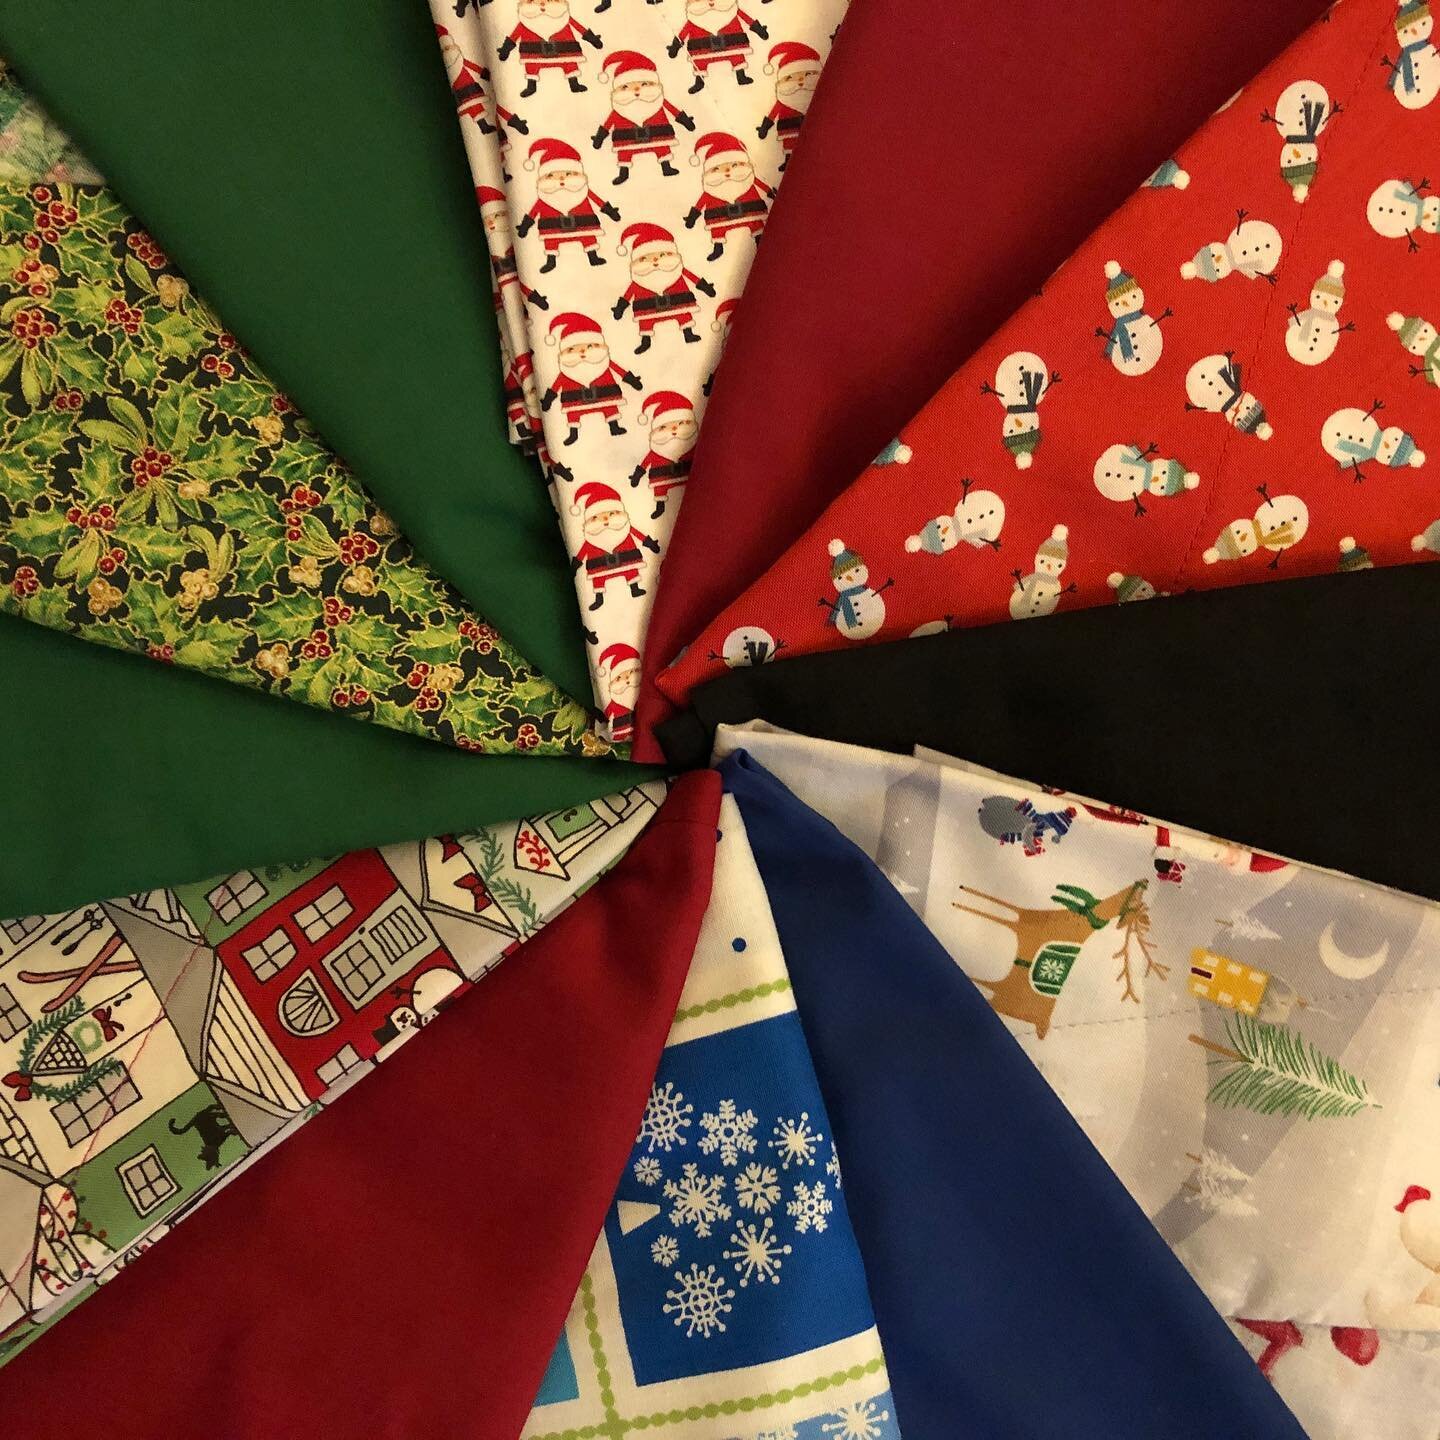 We are feeling very Christmassy at York Scrubs HQ this evening while we sort through this gorgeous collection of festive scrubs. These are destined for frontline GPs to bring a bit of holiday cheer to their consultations.
.
.
Beautiful work as always